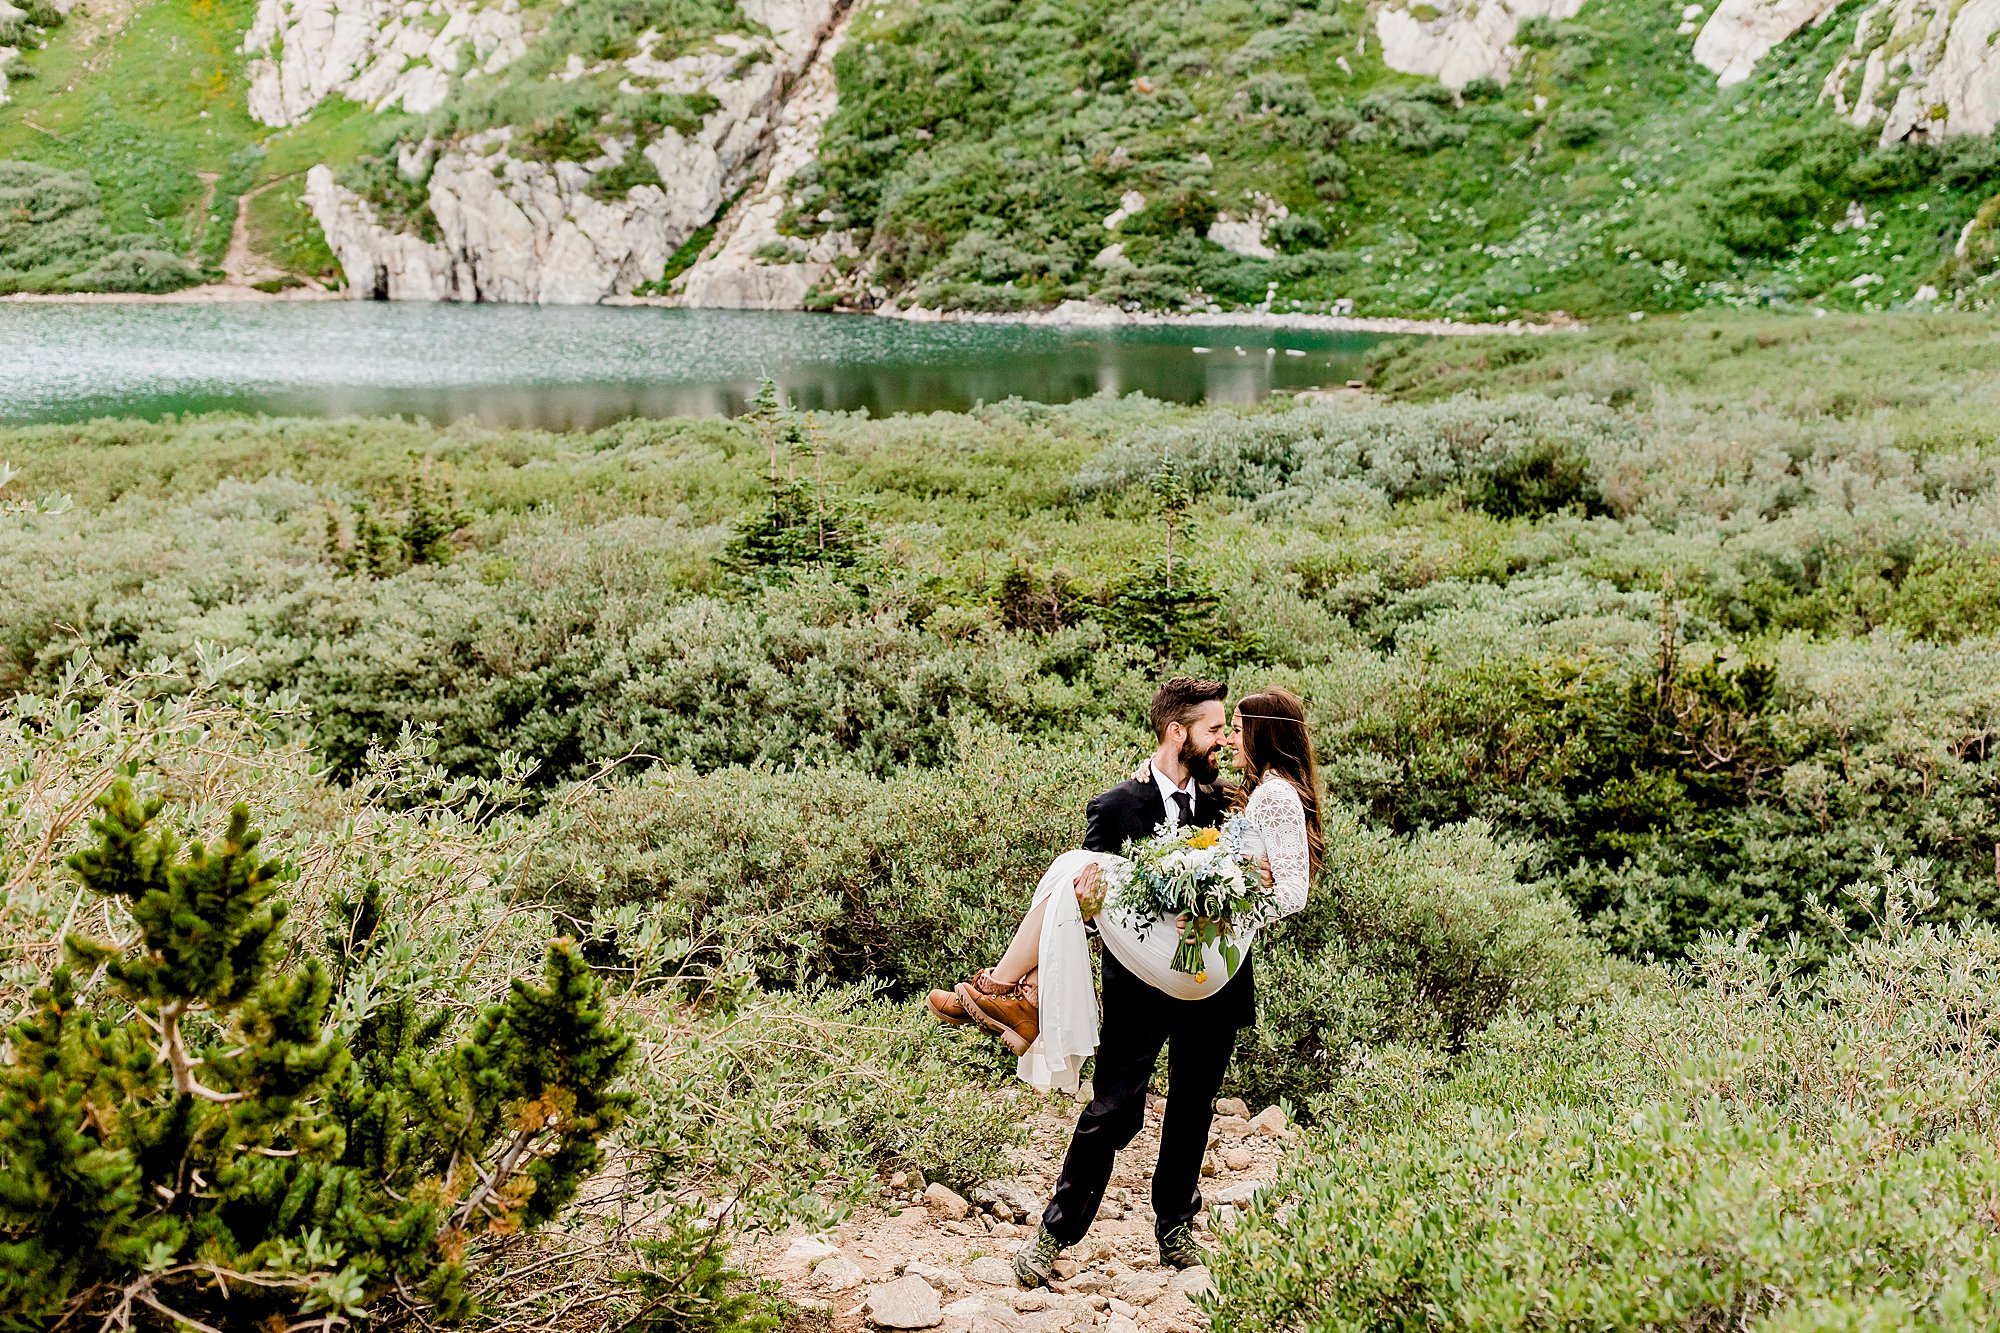 groom holds bride in stunning colorado lake and mountain scenery / brides hiking boots are shown while she holds gorgeous bouquet